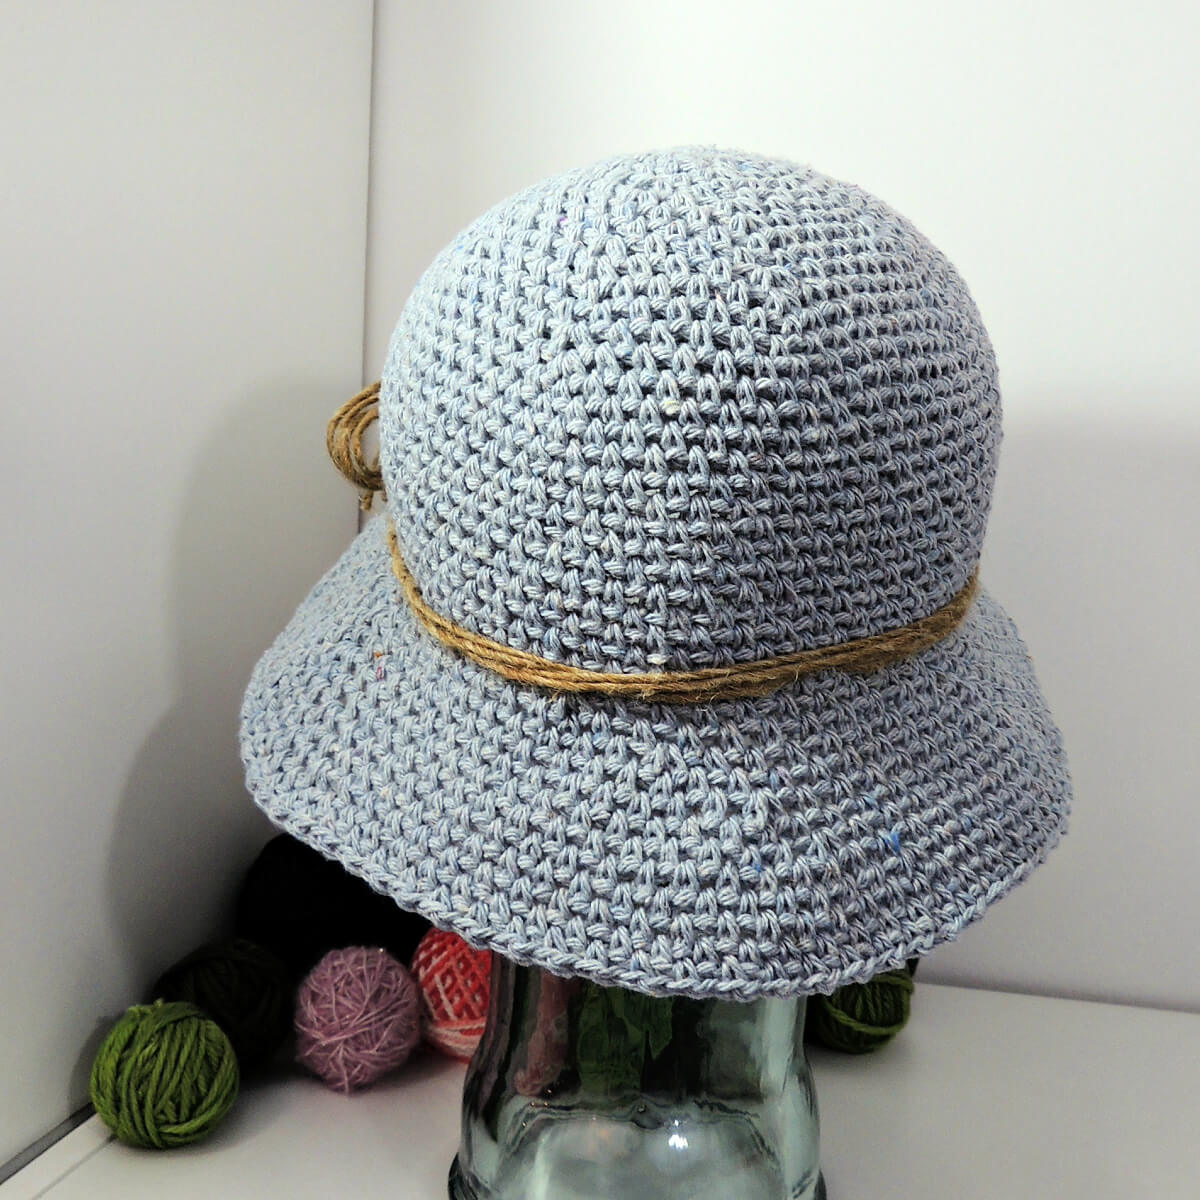 How To Crochet a Bucket Hat: Remarkably Quick & Easy Free Pattern